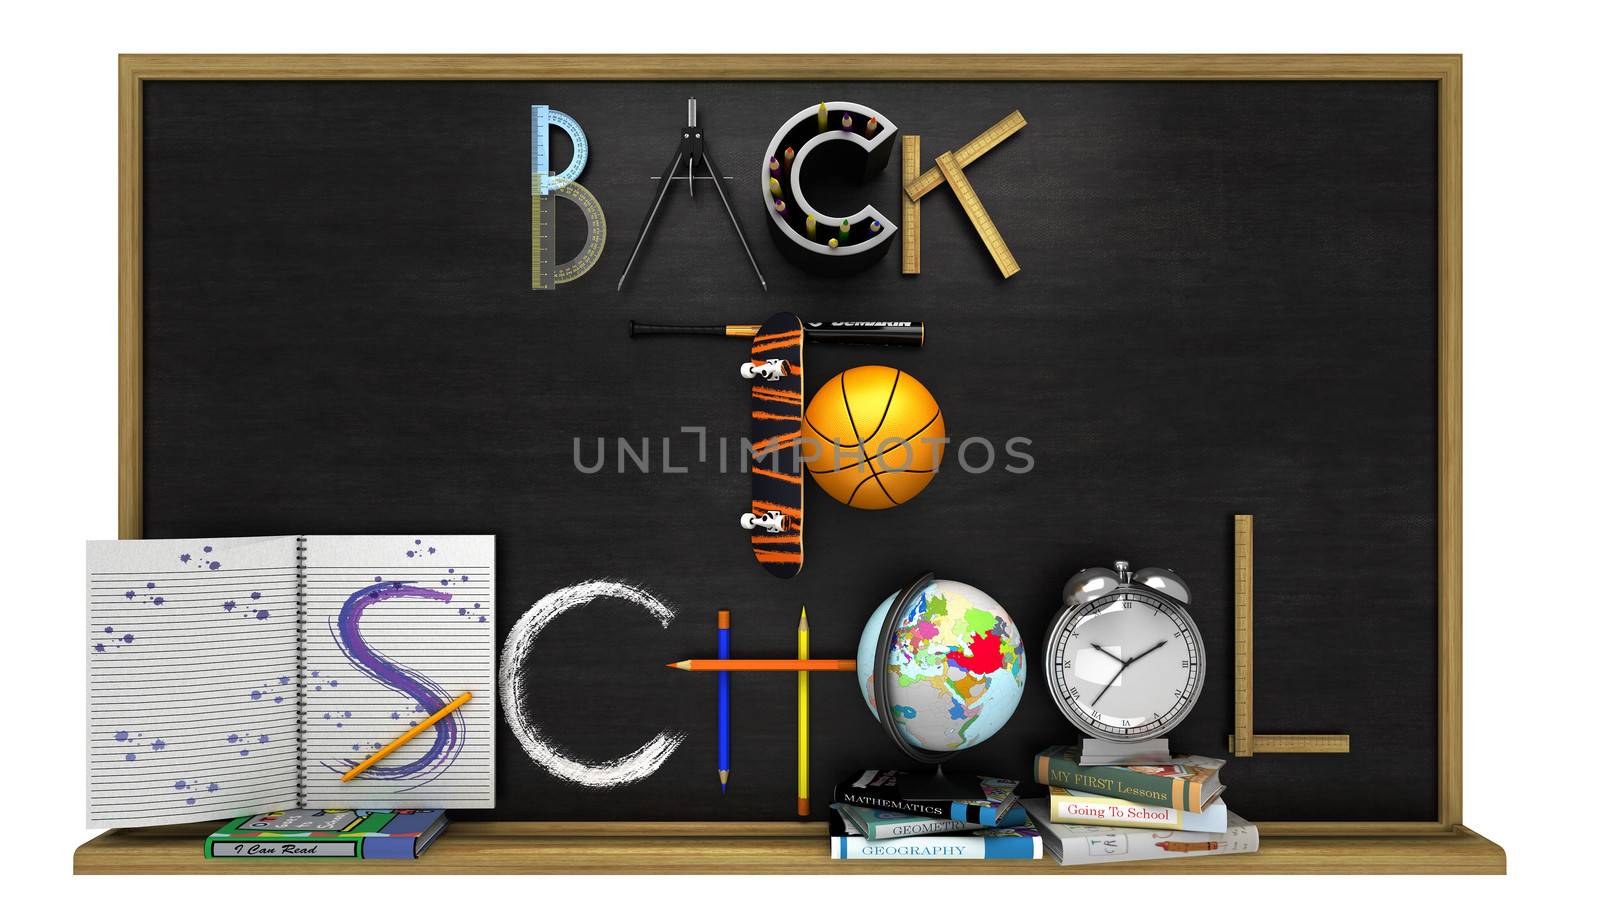 Back to school poster with text on chalkboard,sports and education elements